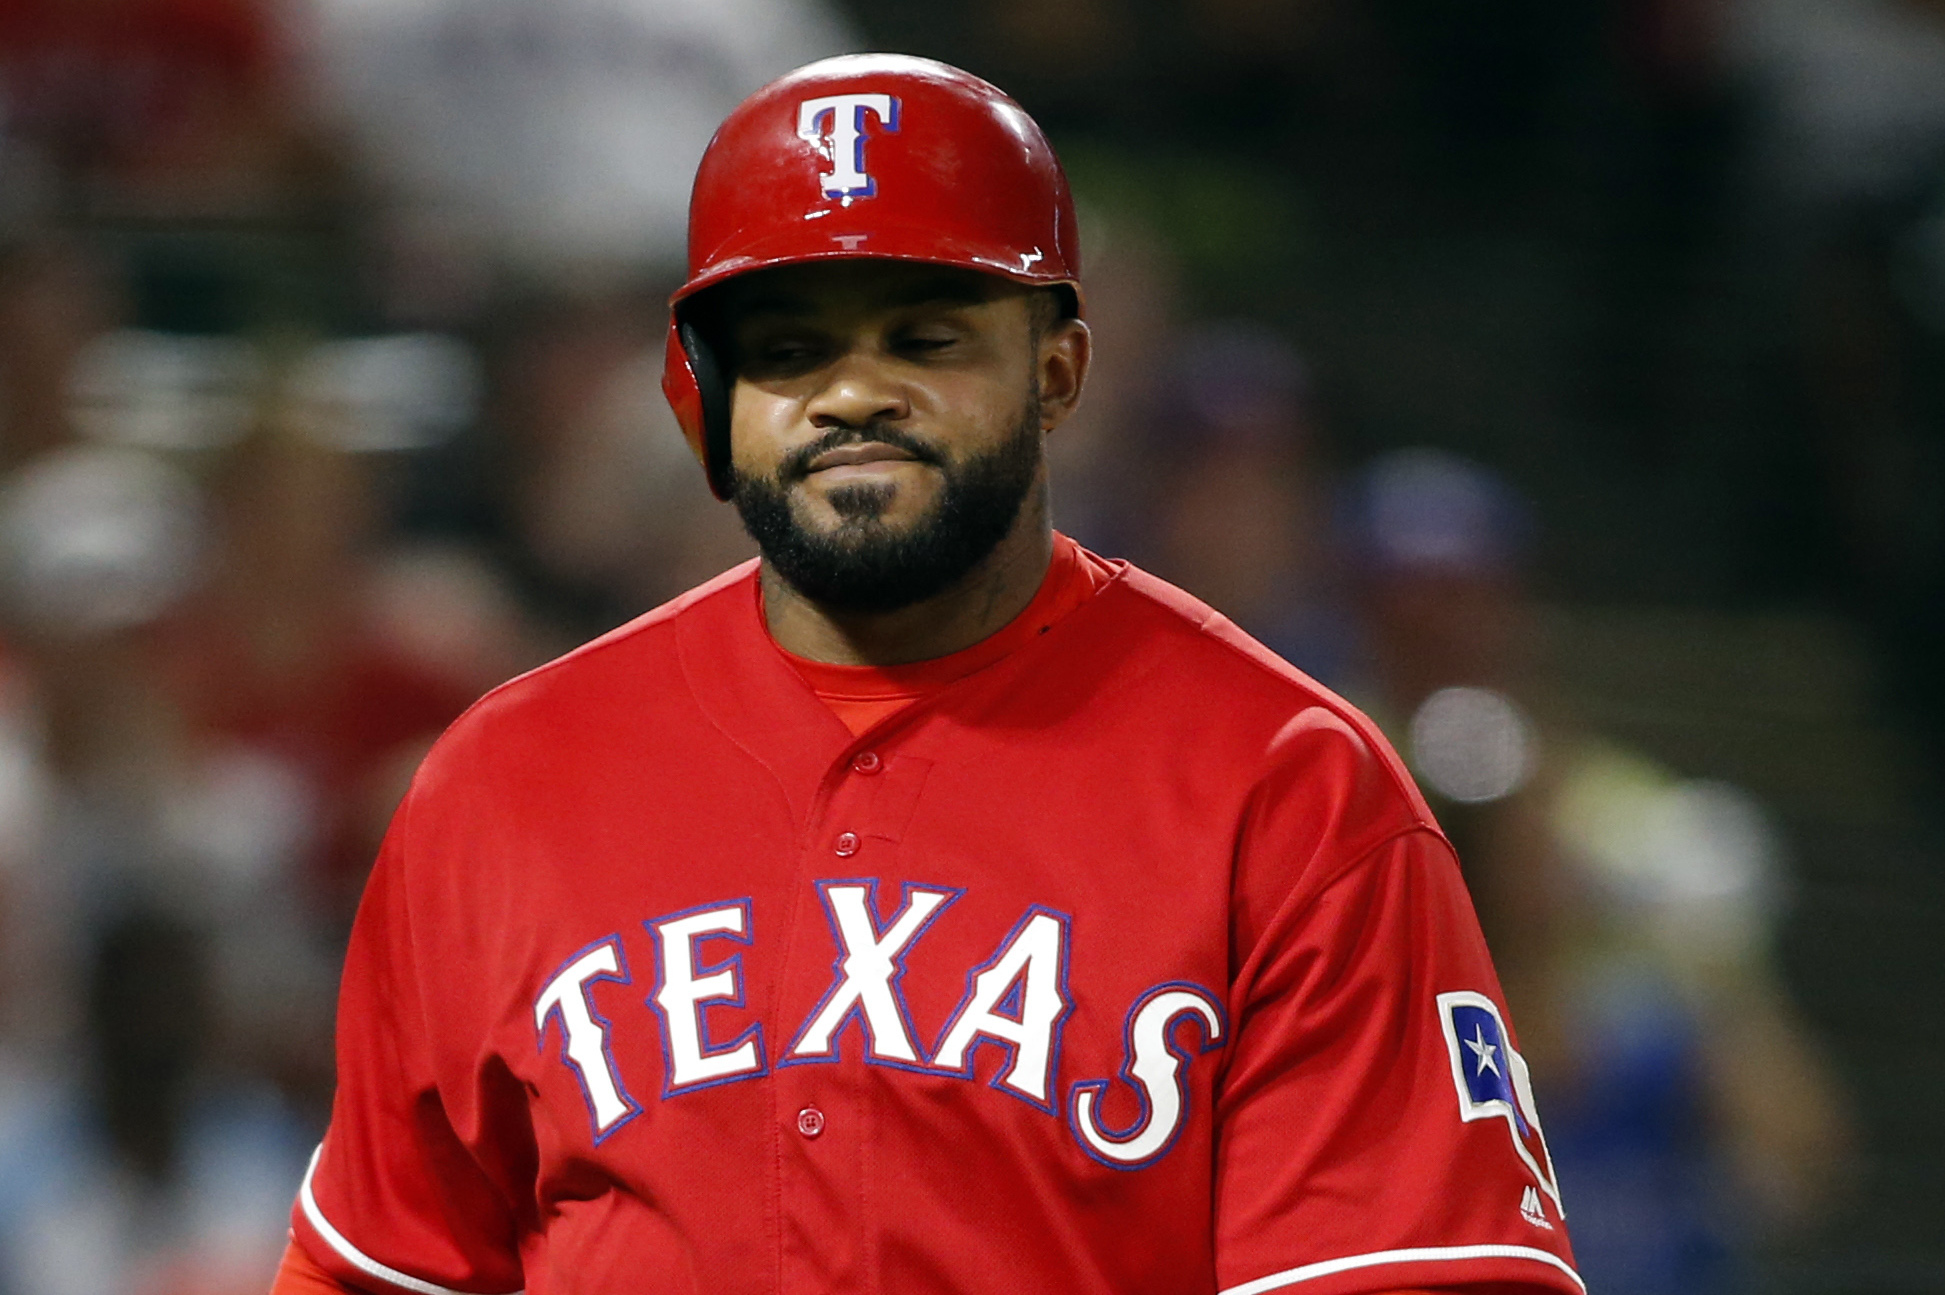 Texas Rangers first baseman Prince Fielder: I don't give a (expletive) what  I weigh 